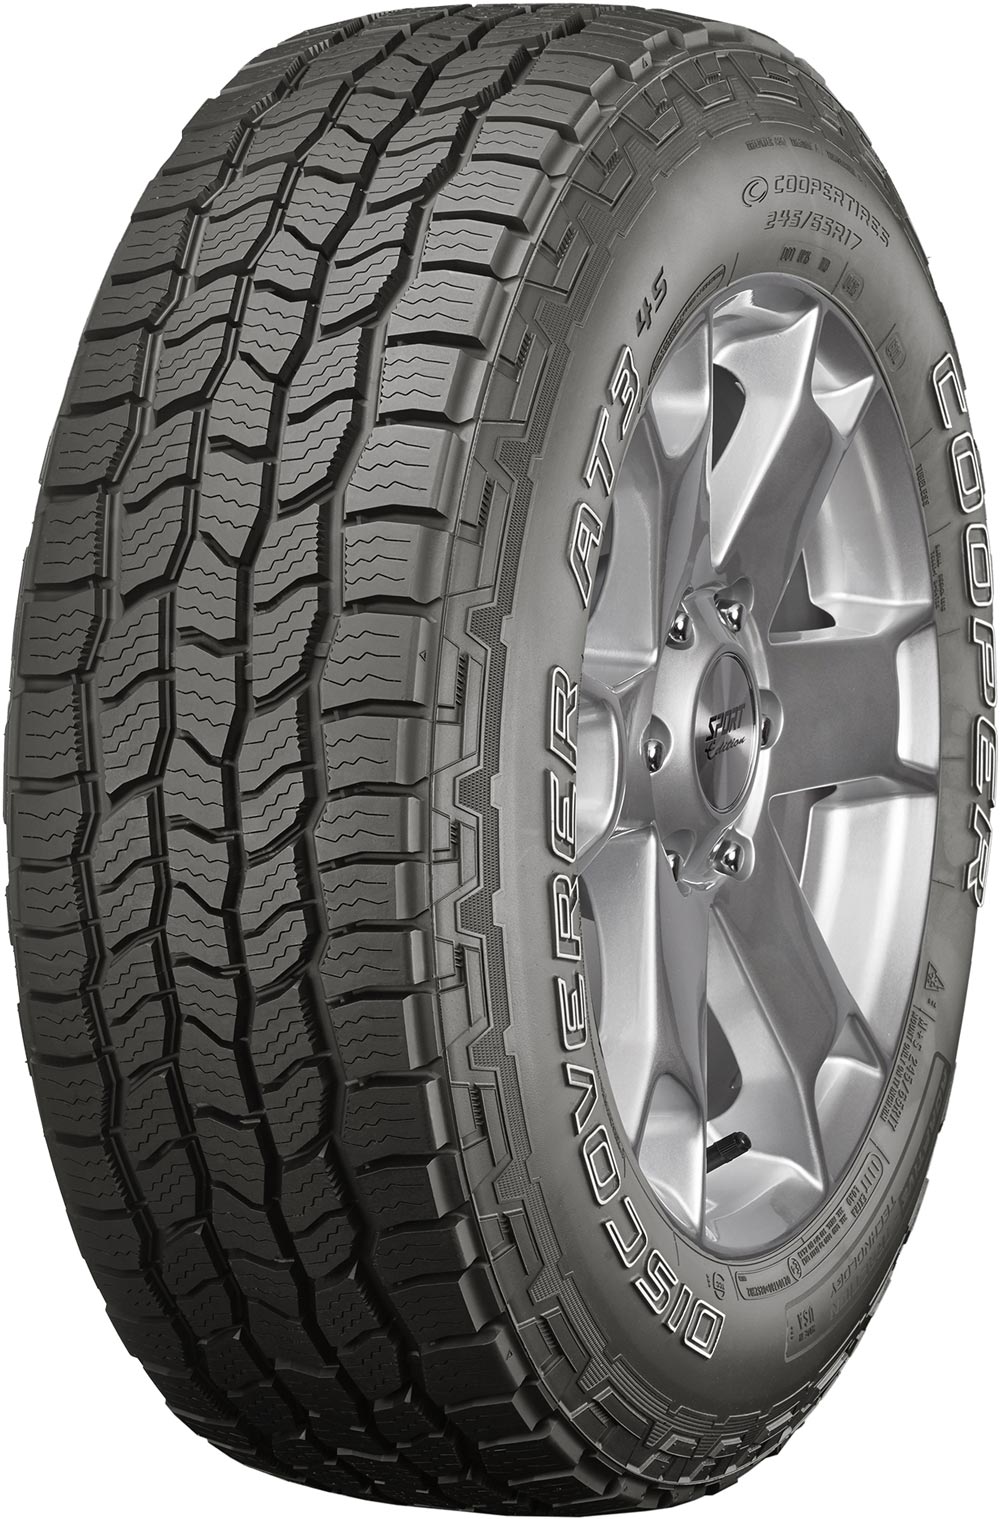 Гуми за джип COOPER DISCOVERER AT3 4S OWL 215/70 R16 100T